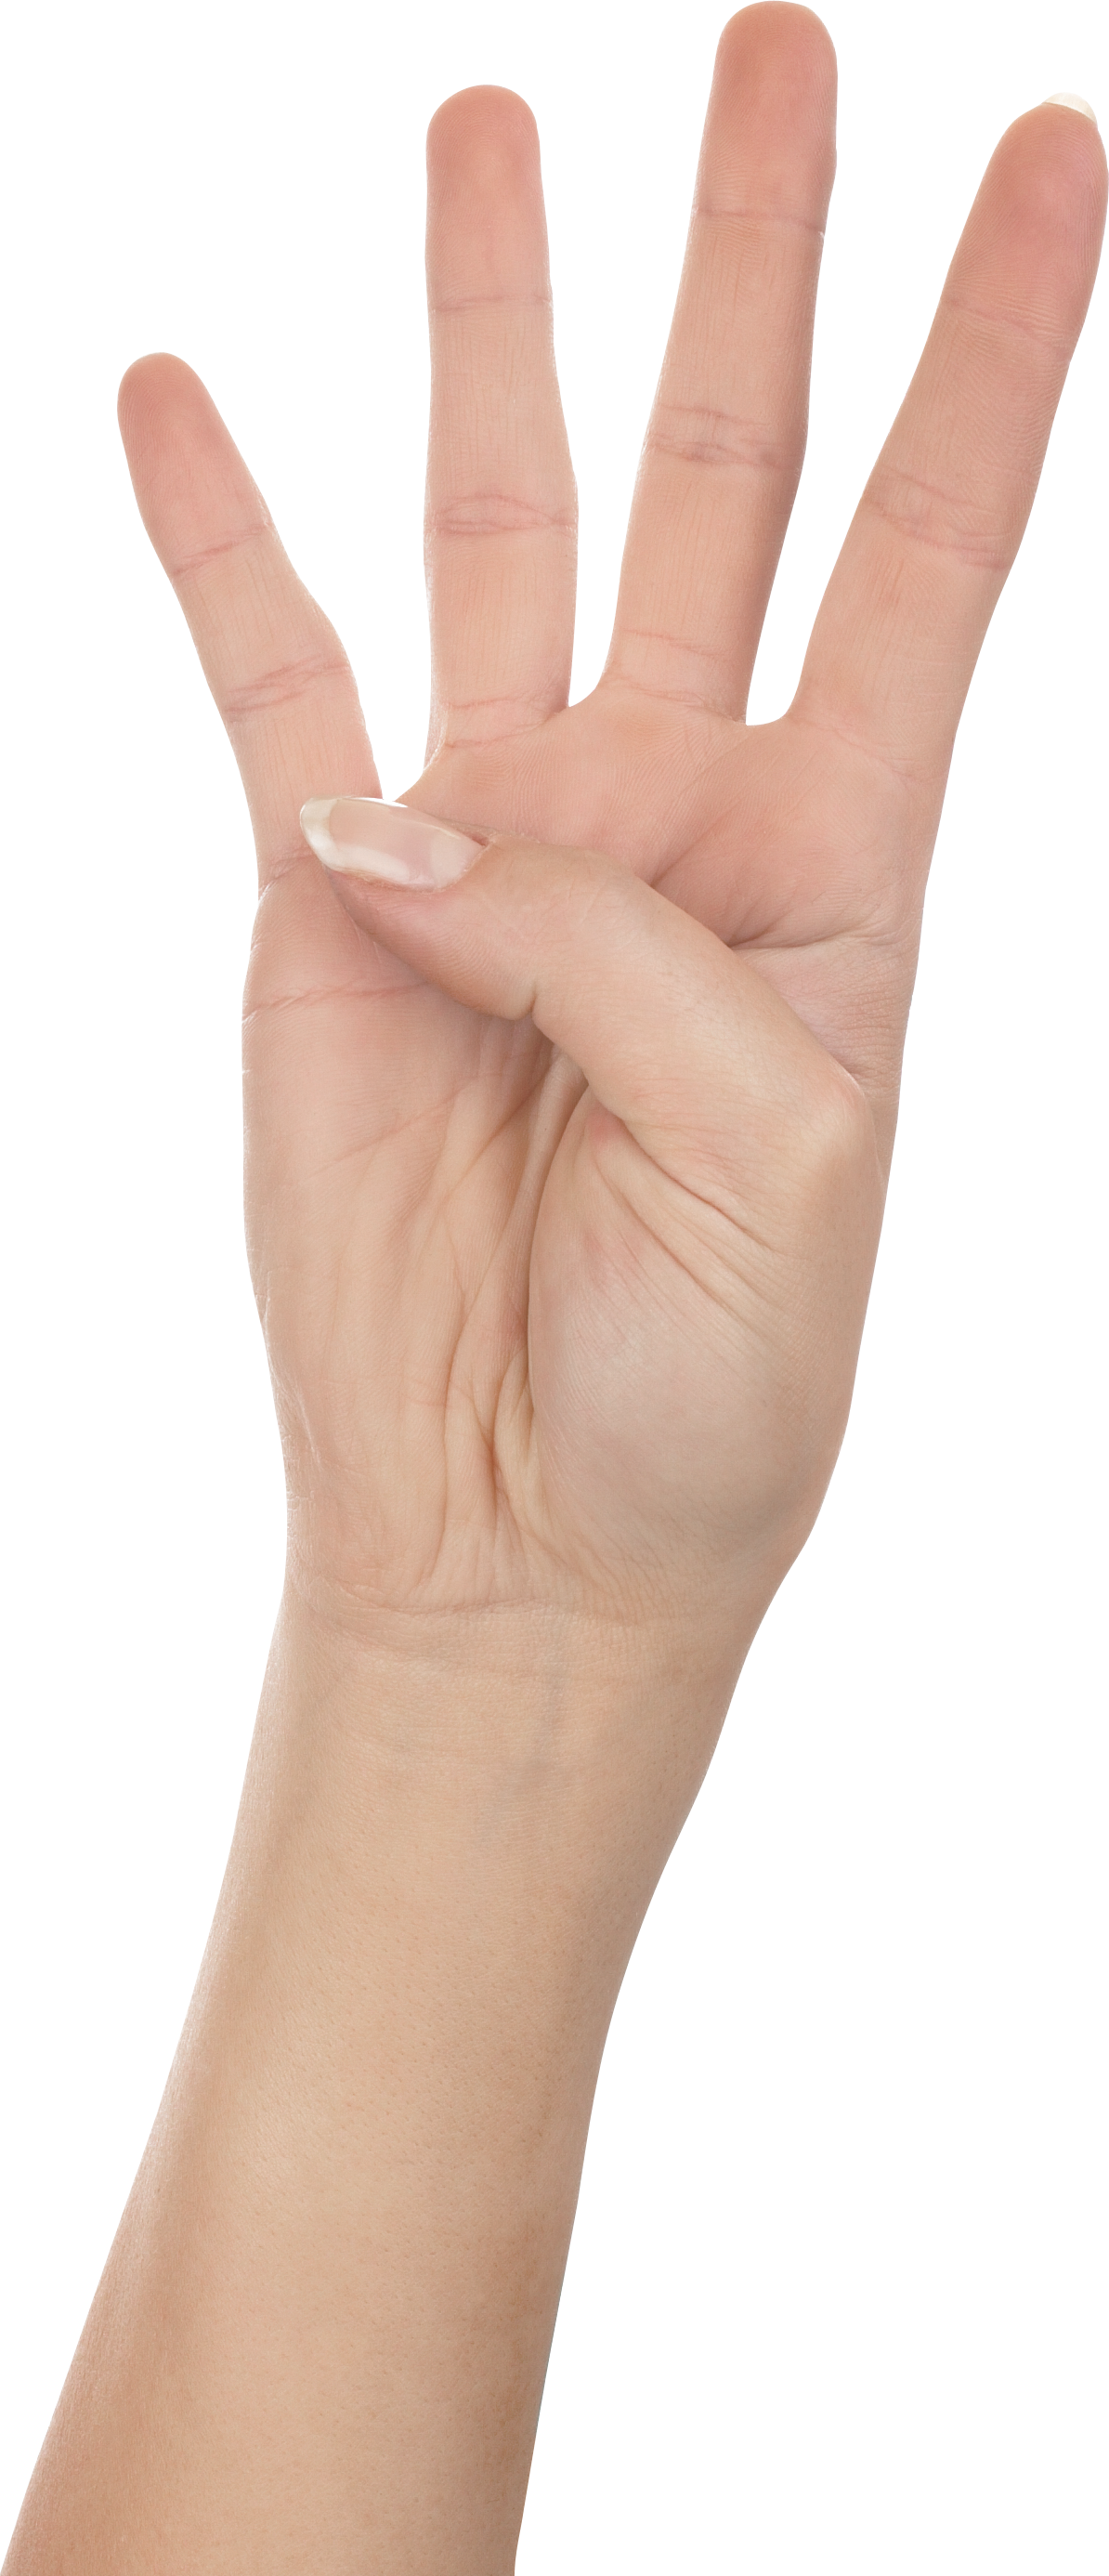 Finger clipart hand grab. Four png image purepng